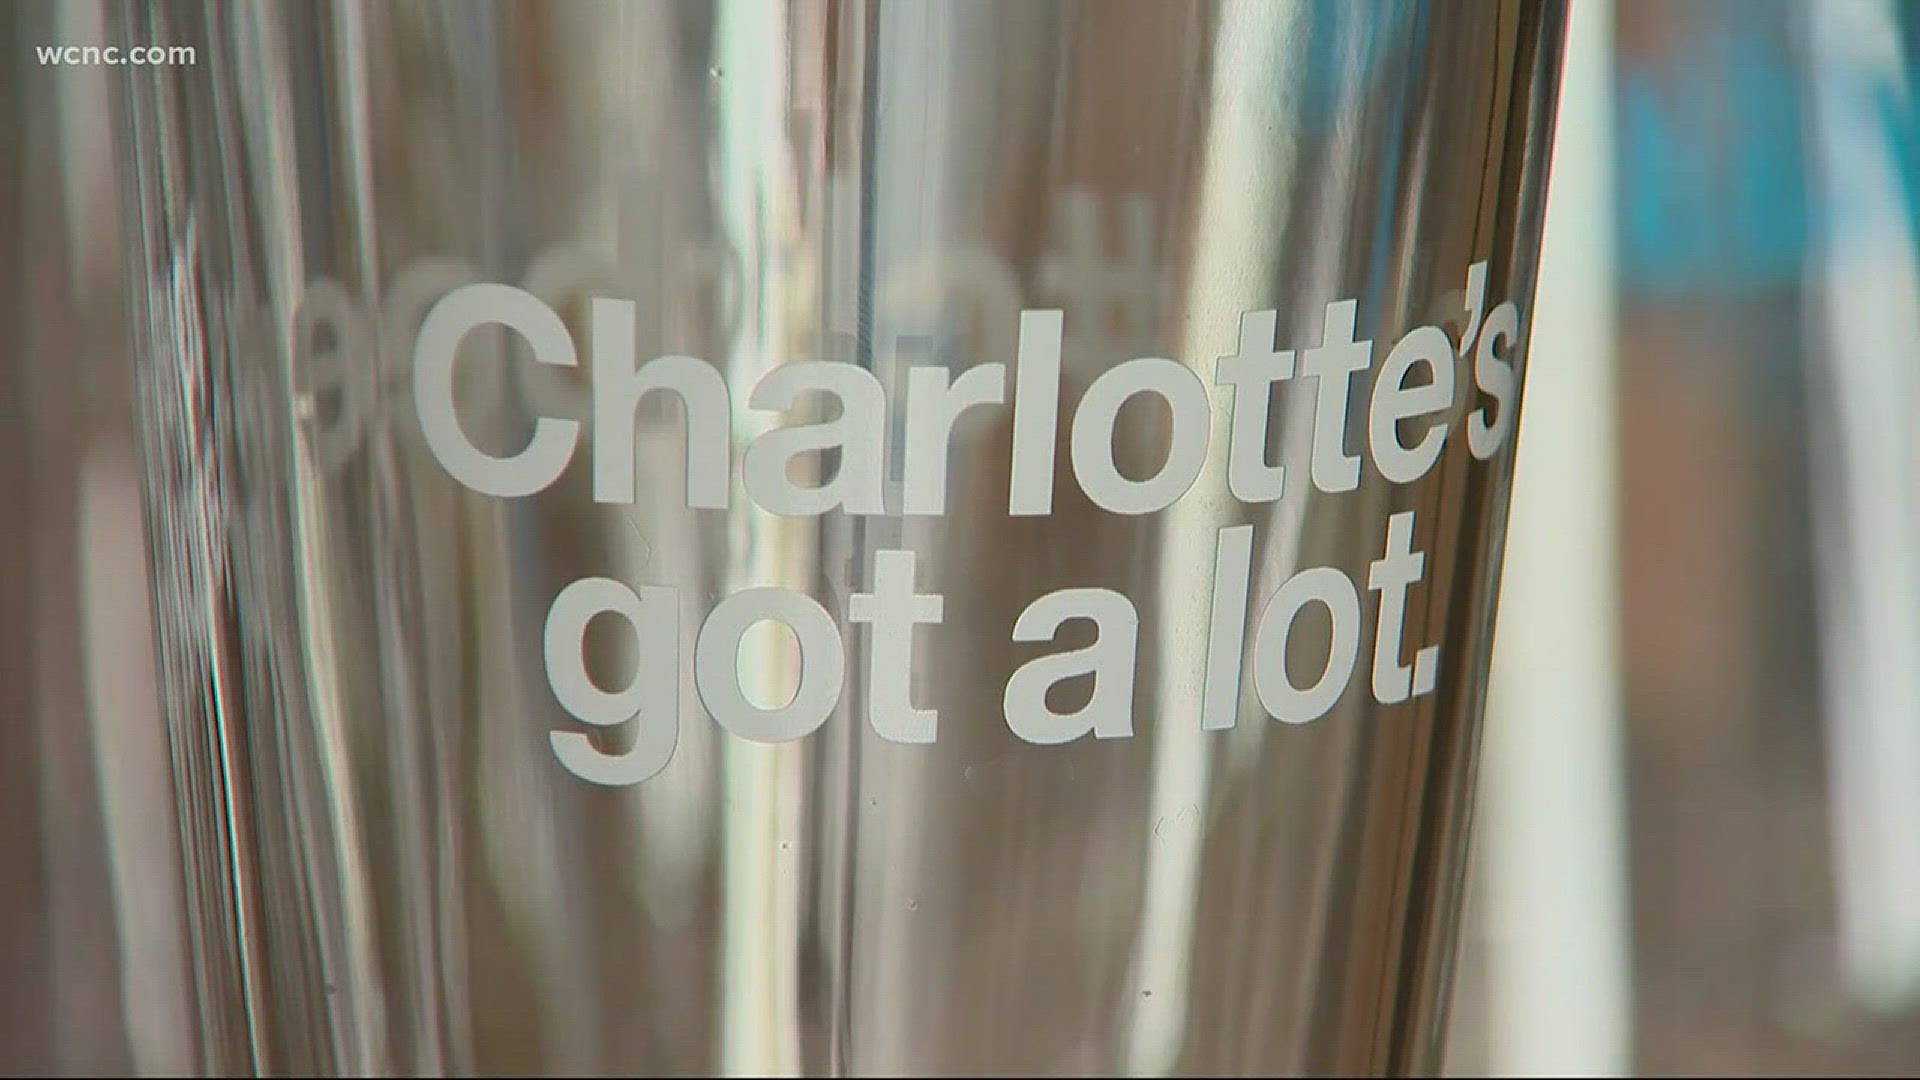 Petition pushes for more Charlotte wineries